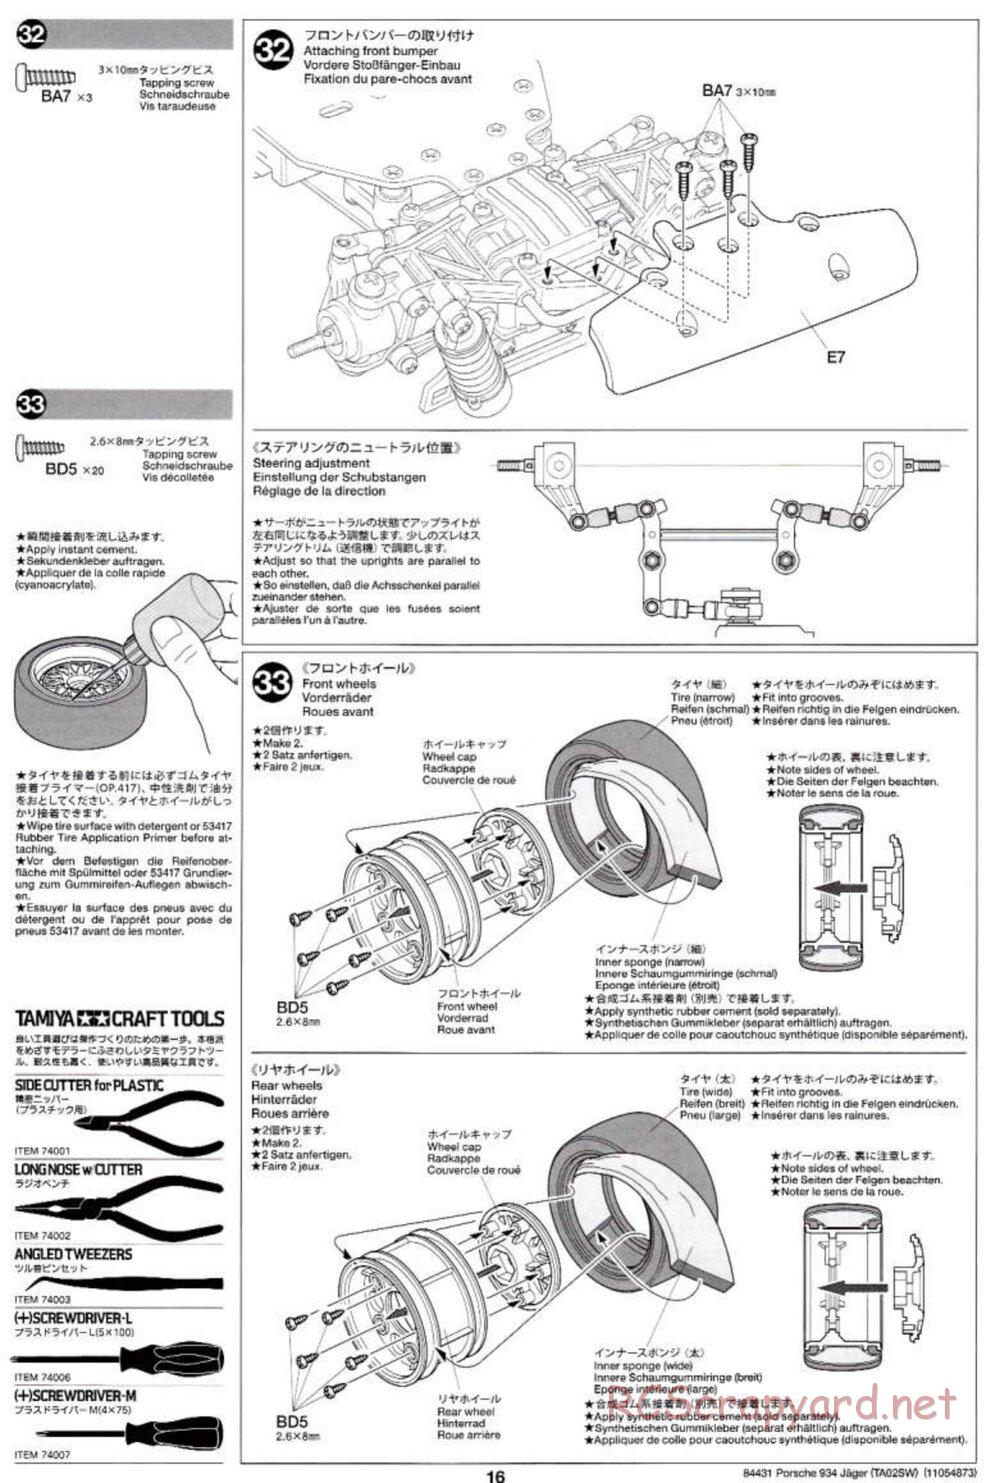 Tamiya - Porsche Turbo RSR Type 934 Jagermeister - TA-02SW Chassis - Manual - Page 16